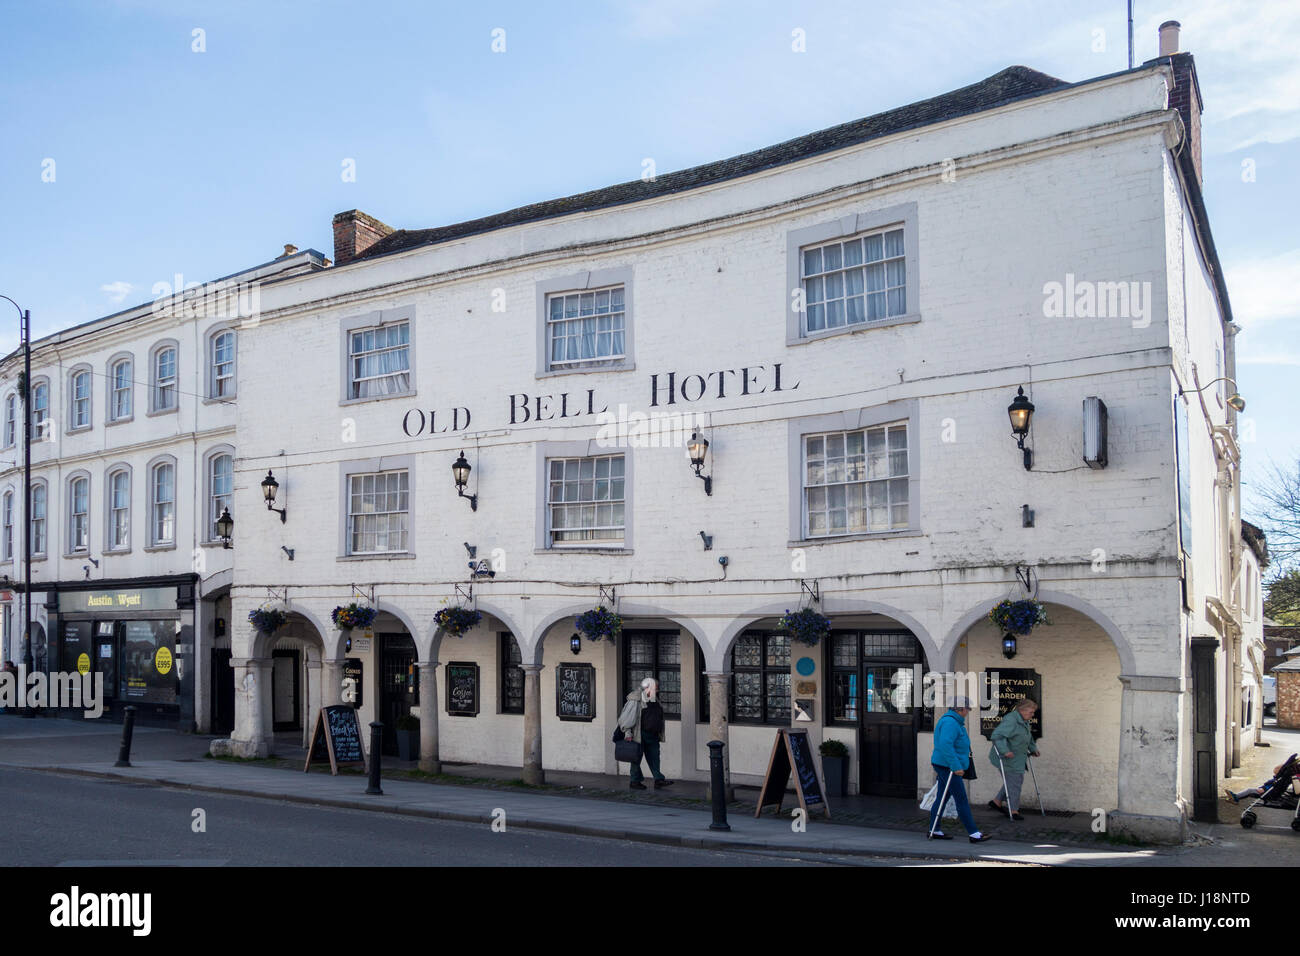 Old Bell Hotel, Warminster, Wiltshire, England, UK Stock Photo